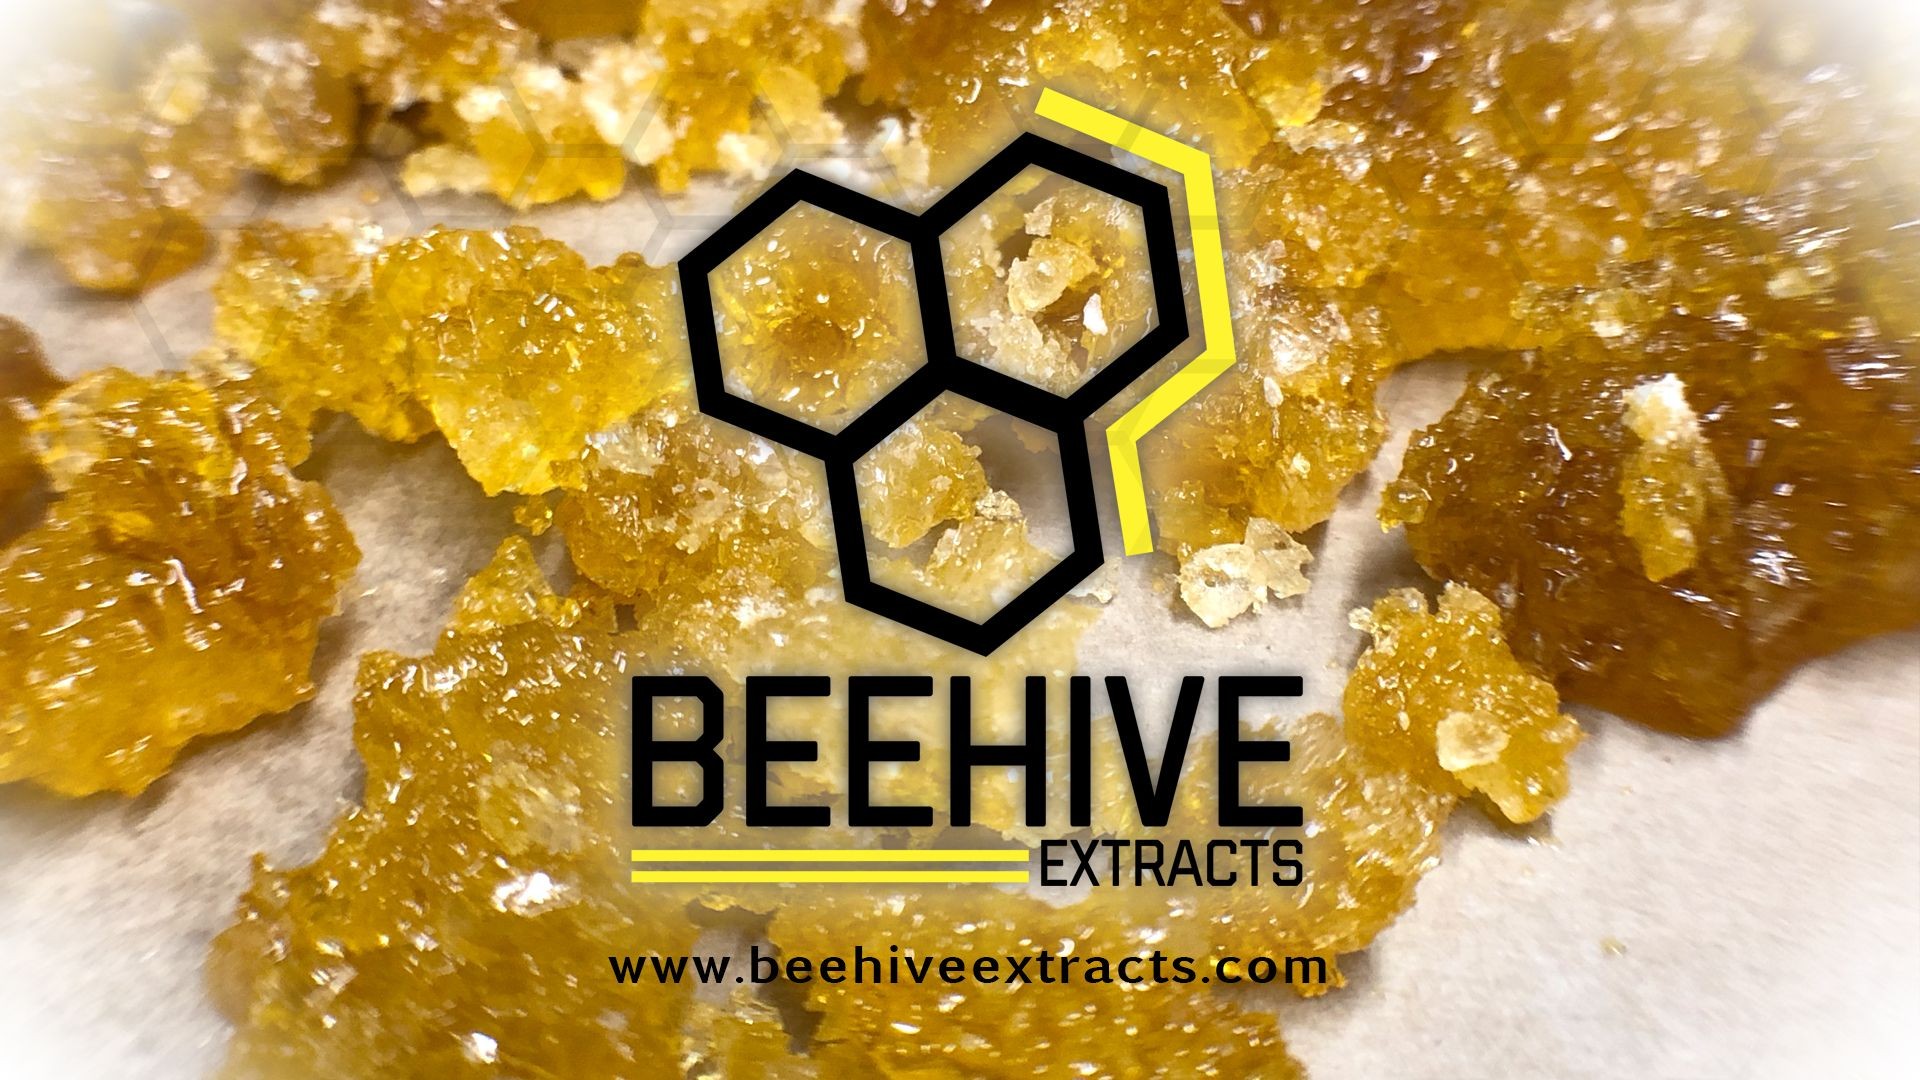 Fresh Drop Of Beehive Extracts!